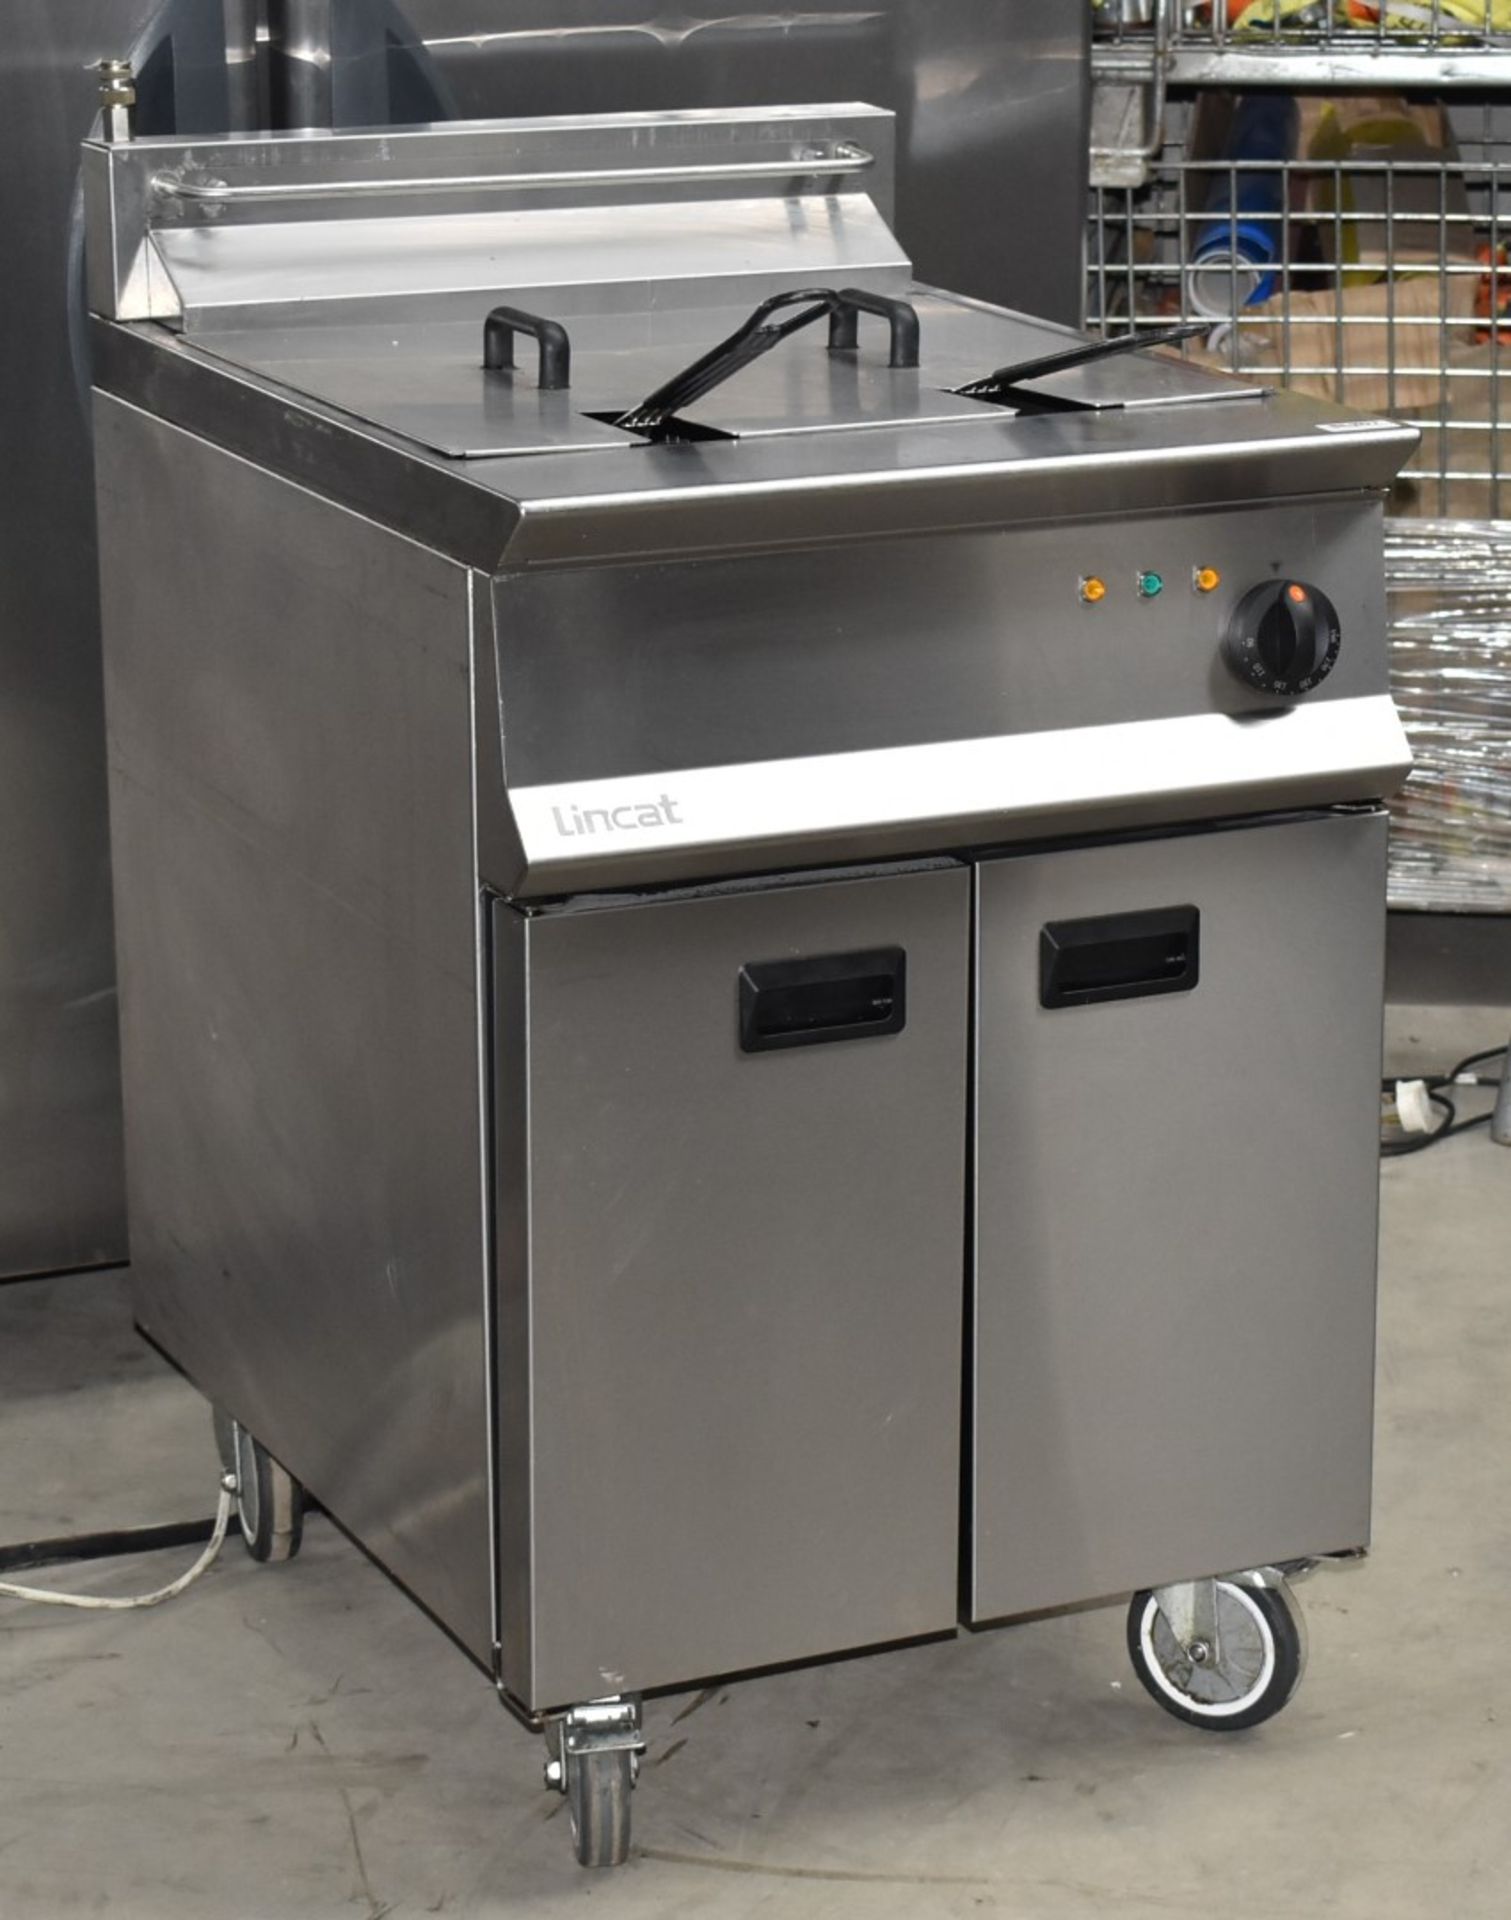 1 x Lincat Opus 800 OE8108 Single Tank Electric Fryer With Filtration - 37L Tank With Two - Image 17 of 17